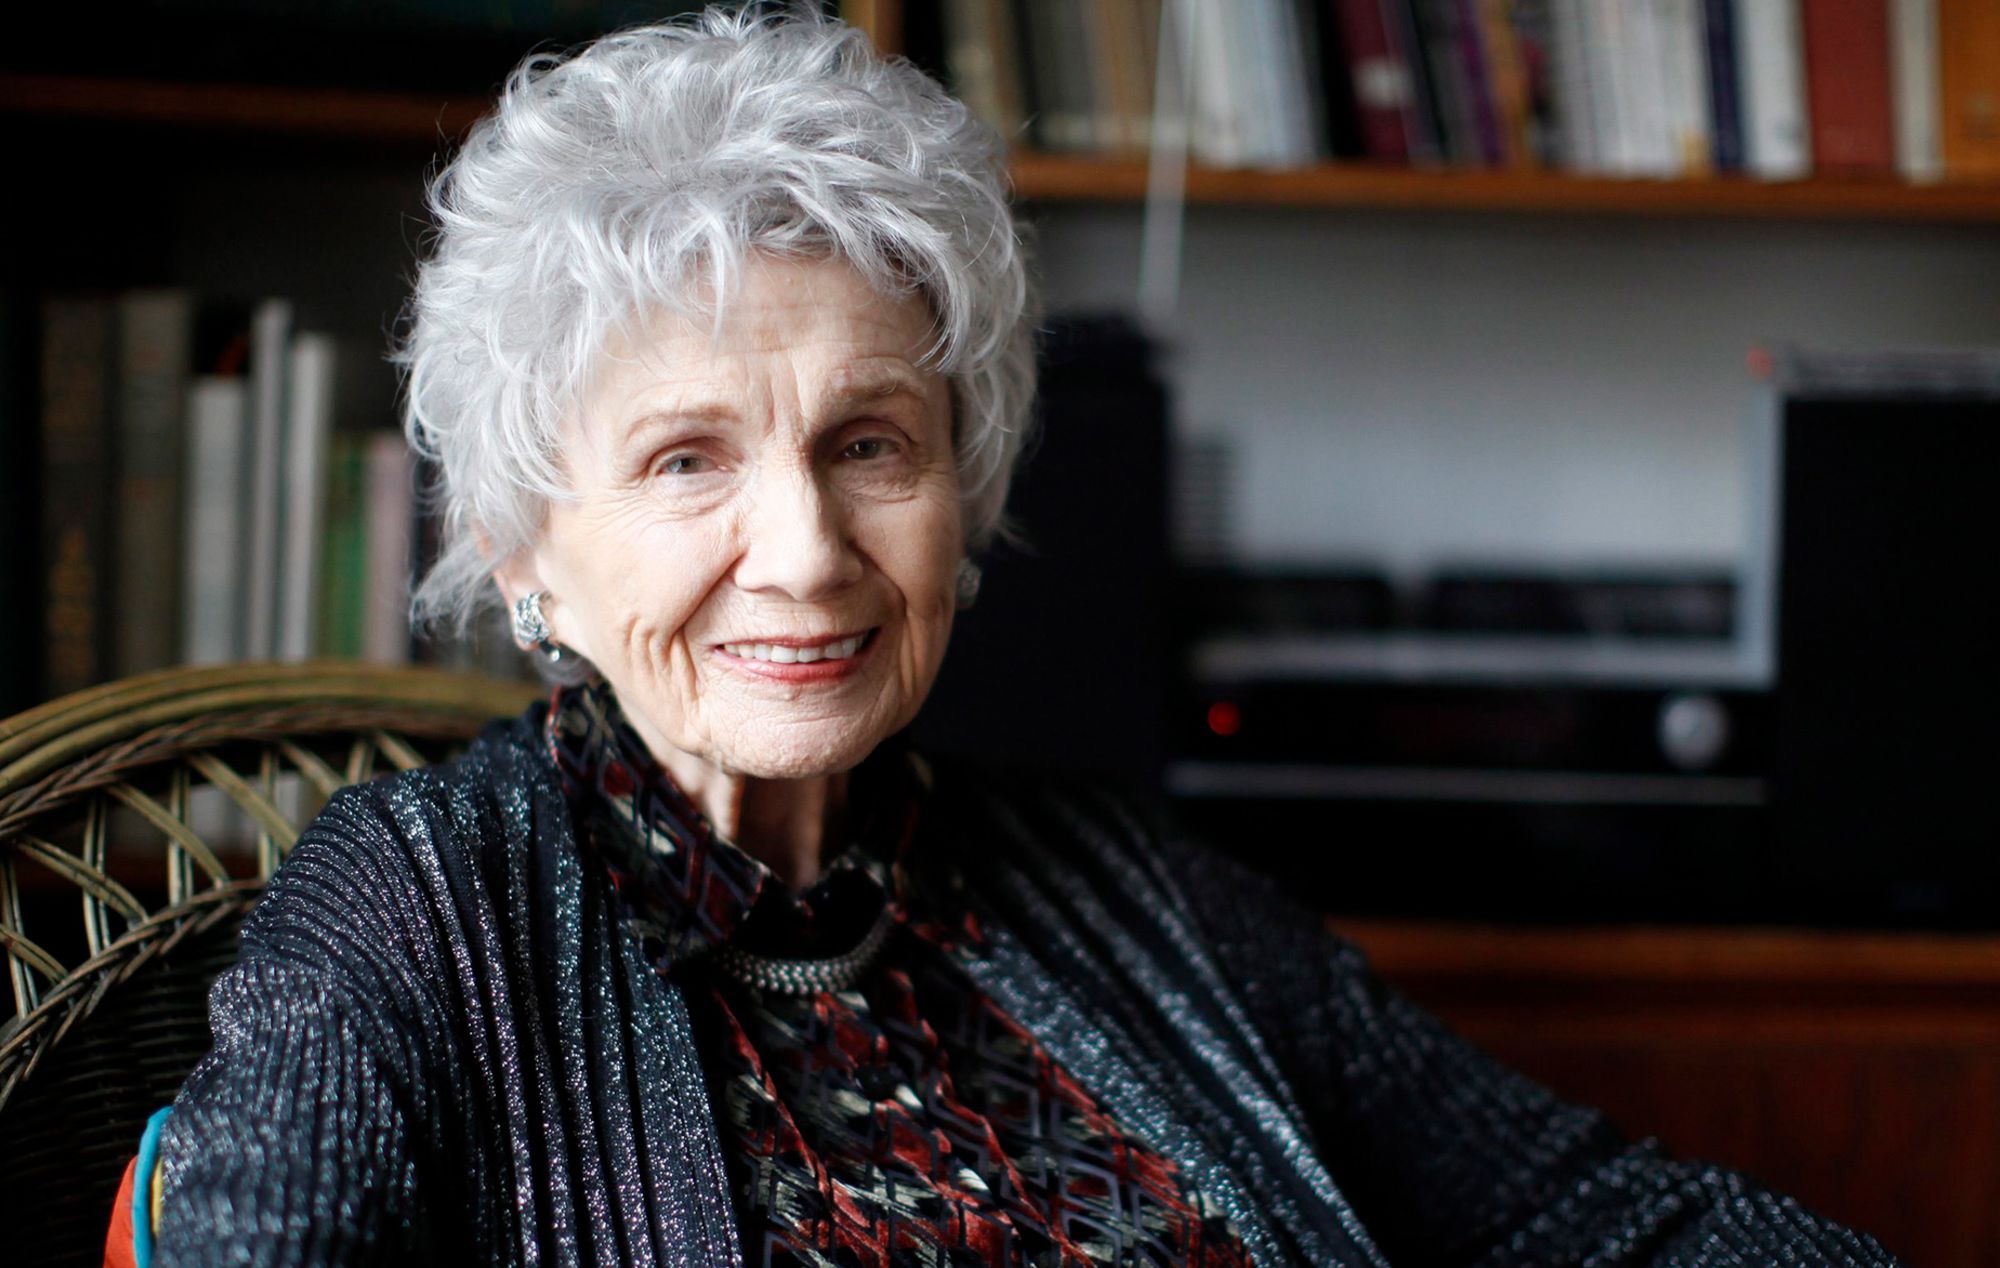 Author Alice Munro, widely lauded as the master of the short story, photographed in December 2013.